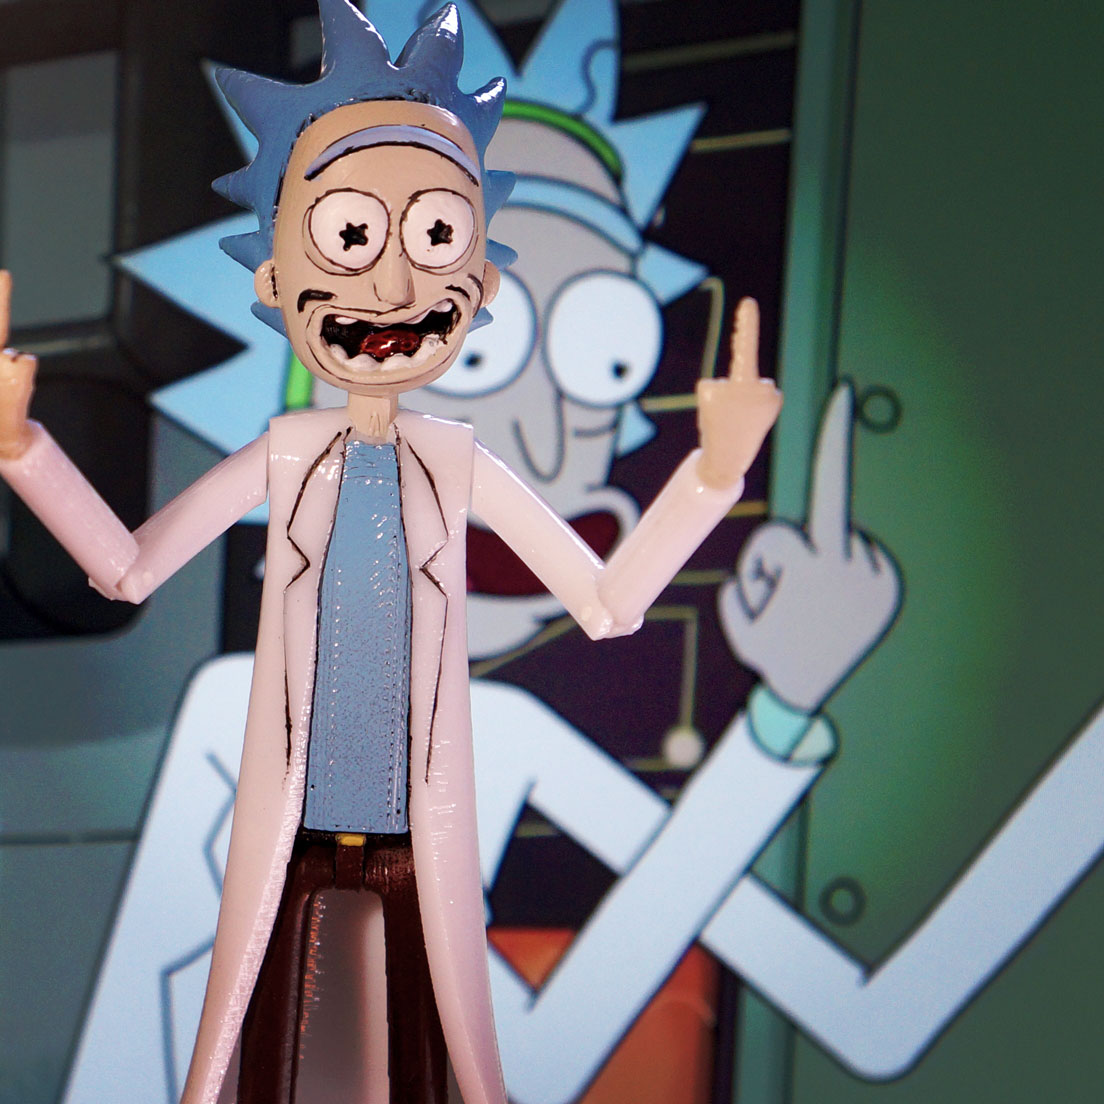 Rick Action Figure (Rick and Morty)